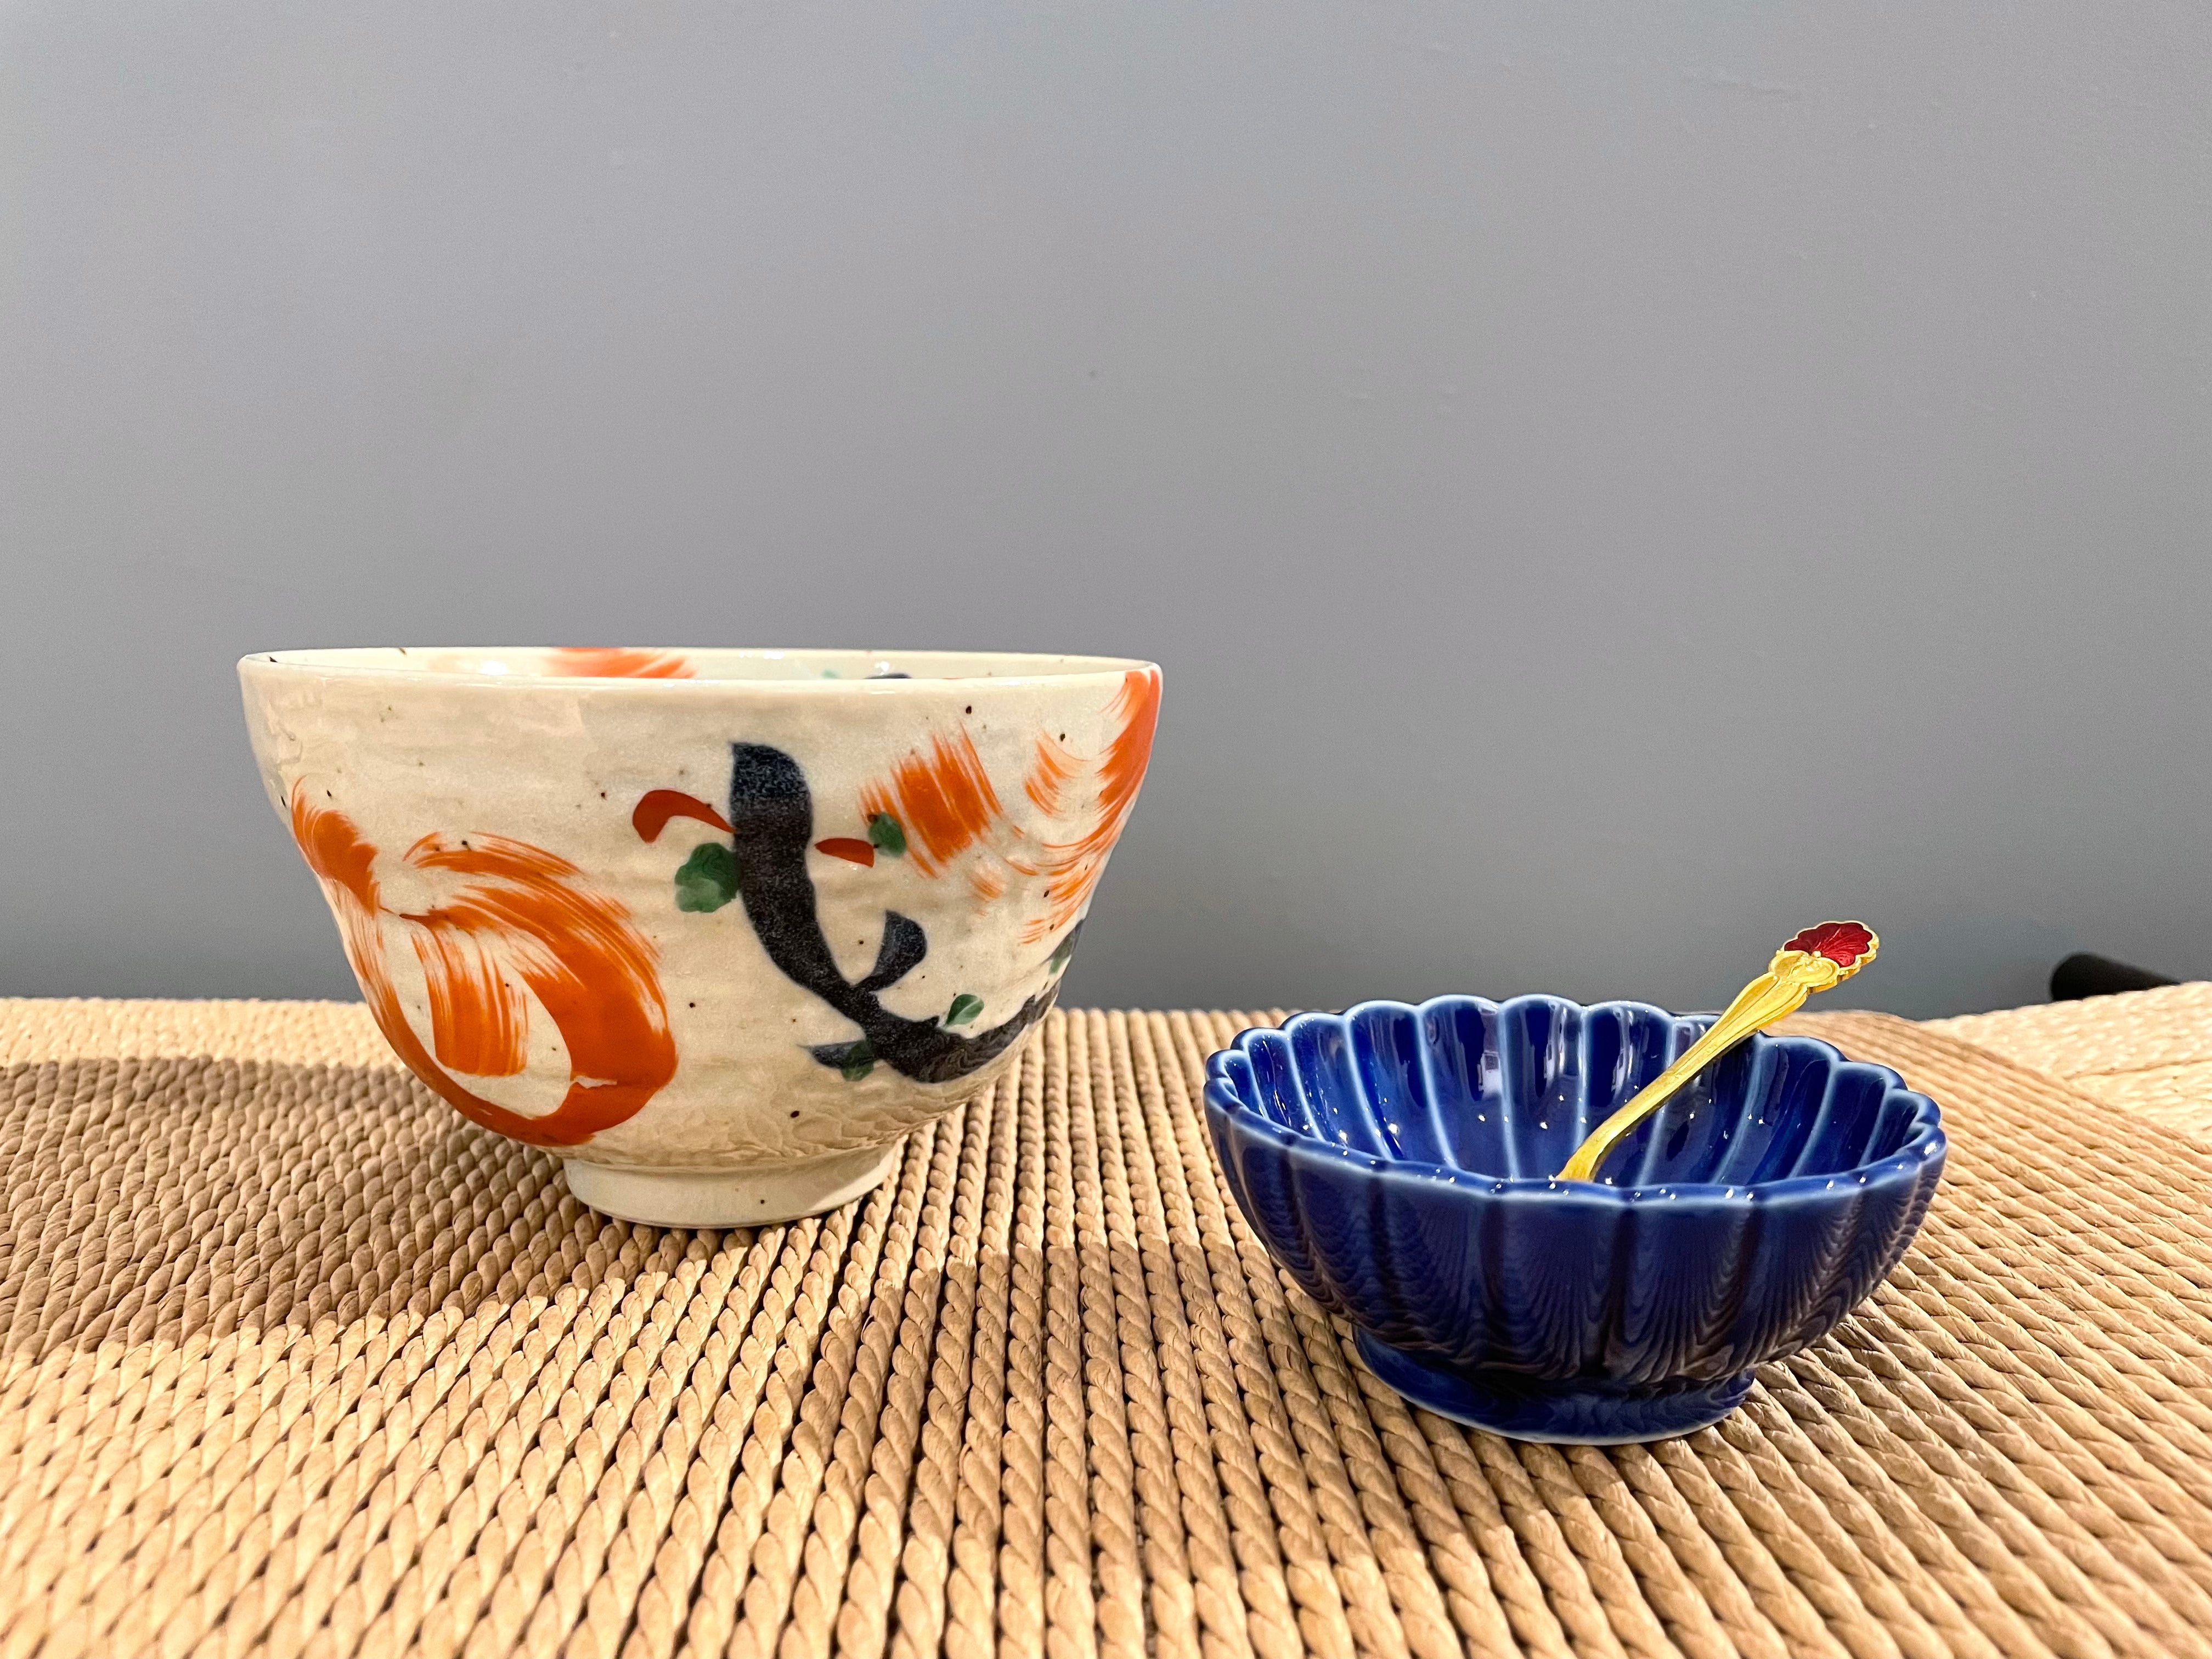 Handmade bowl with red and blue pattern